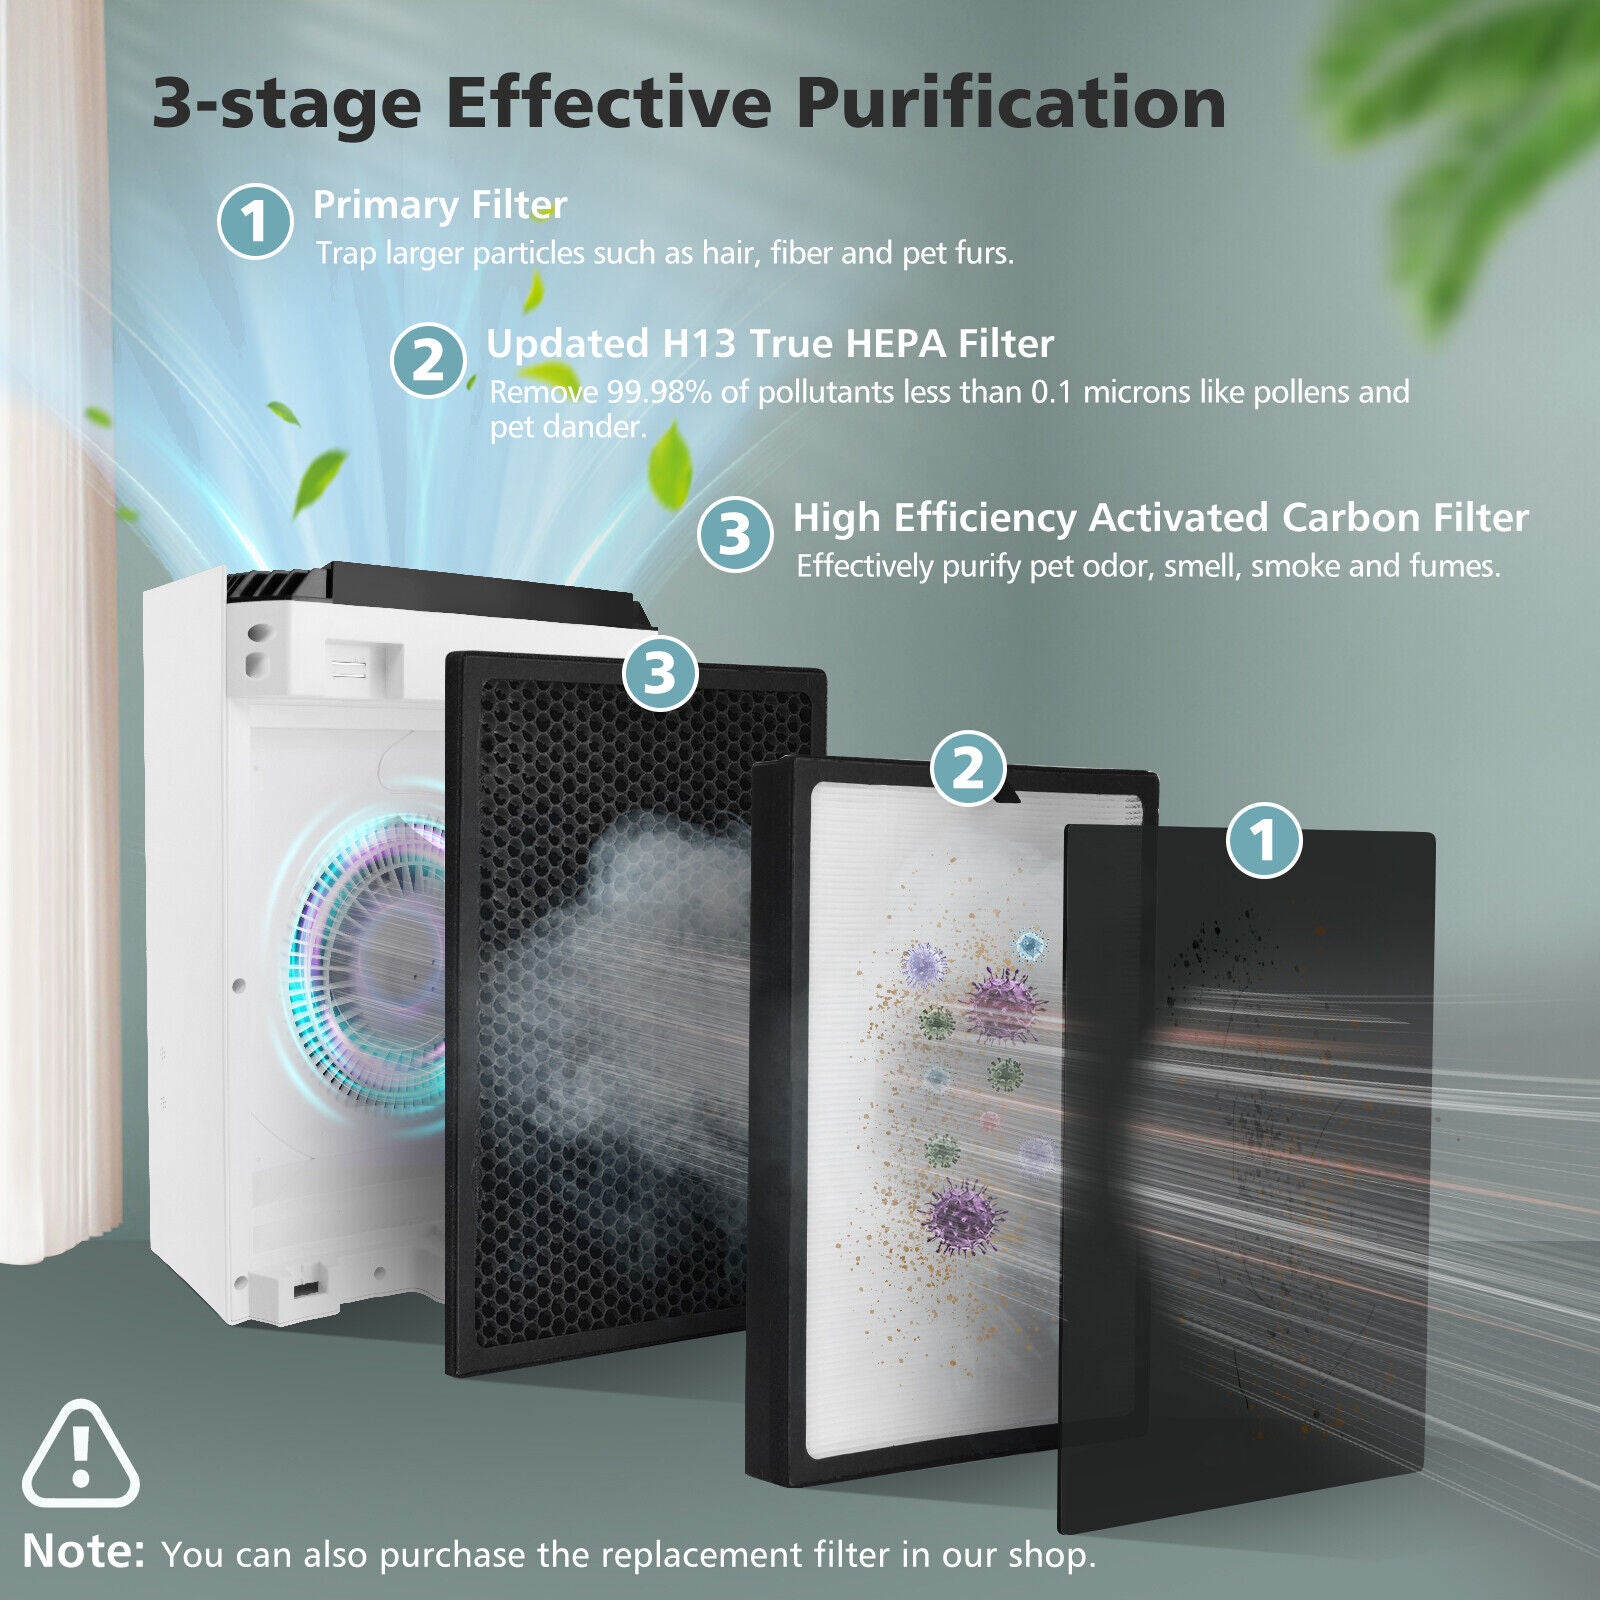 3-stage Effective Purification: This air purifier consists of a primary filter, a high-efficiency H13 HEPA filter, and an activated carbon filter. The outstanding purification ability enables this home air cleaner to get rid of 99.98% of pollutants and smells in the air, such as hair, pet dander, pollen, smoke, dust, etc.